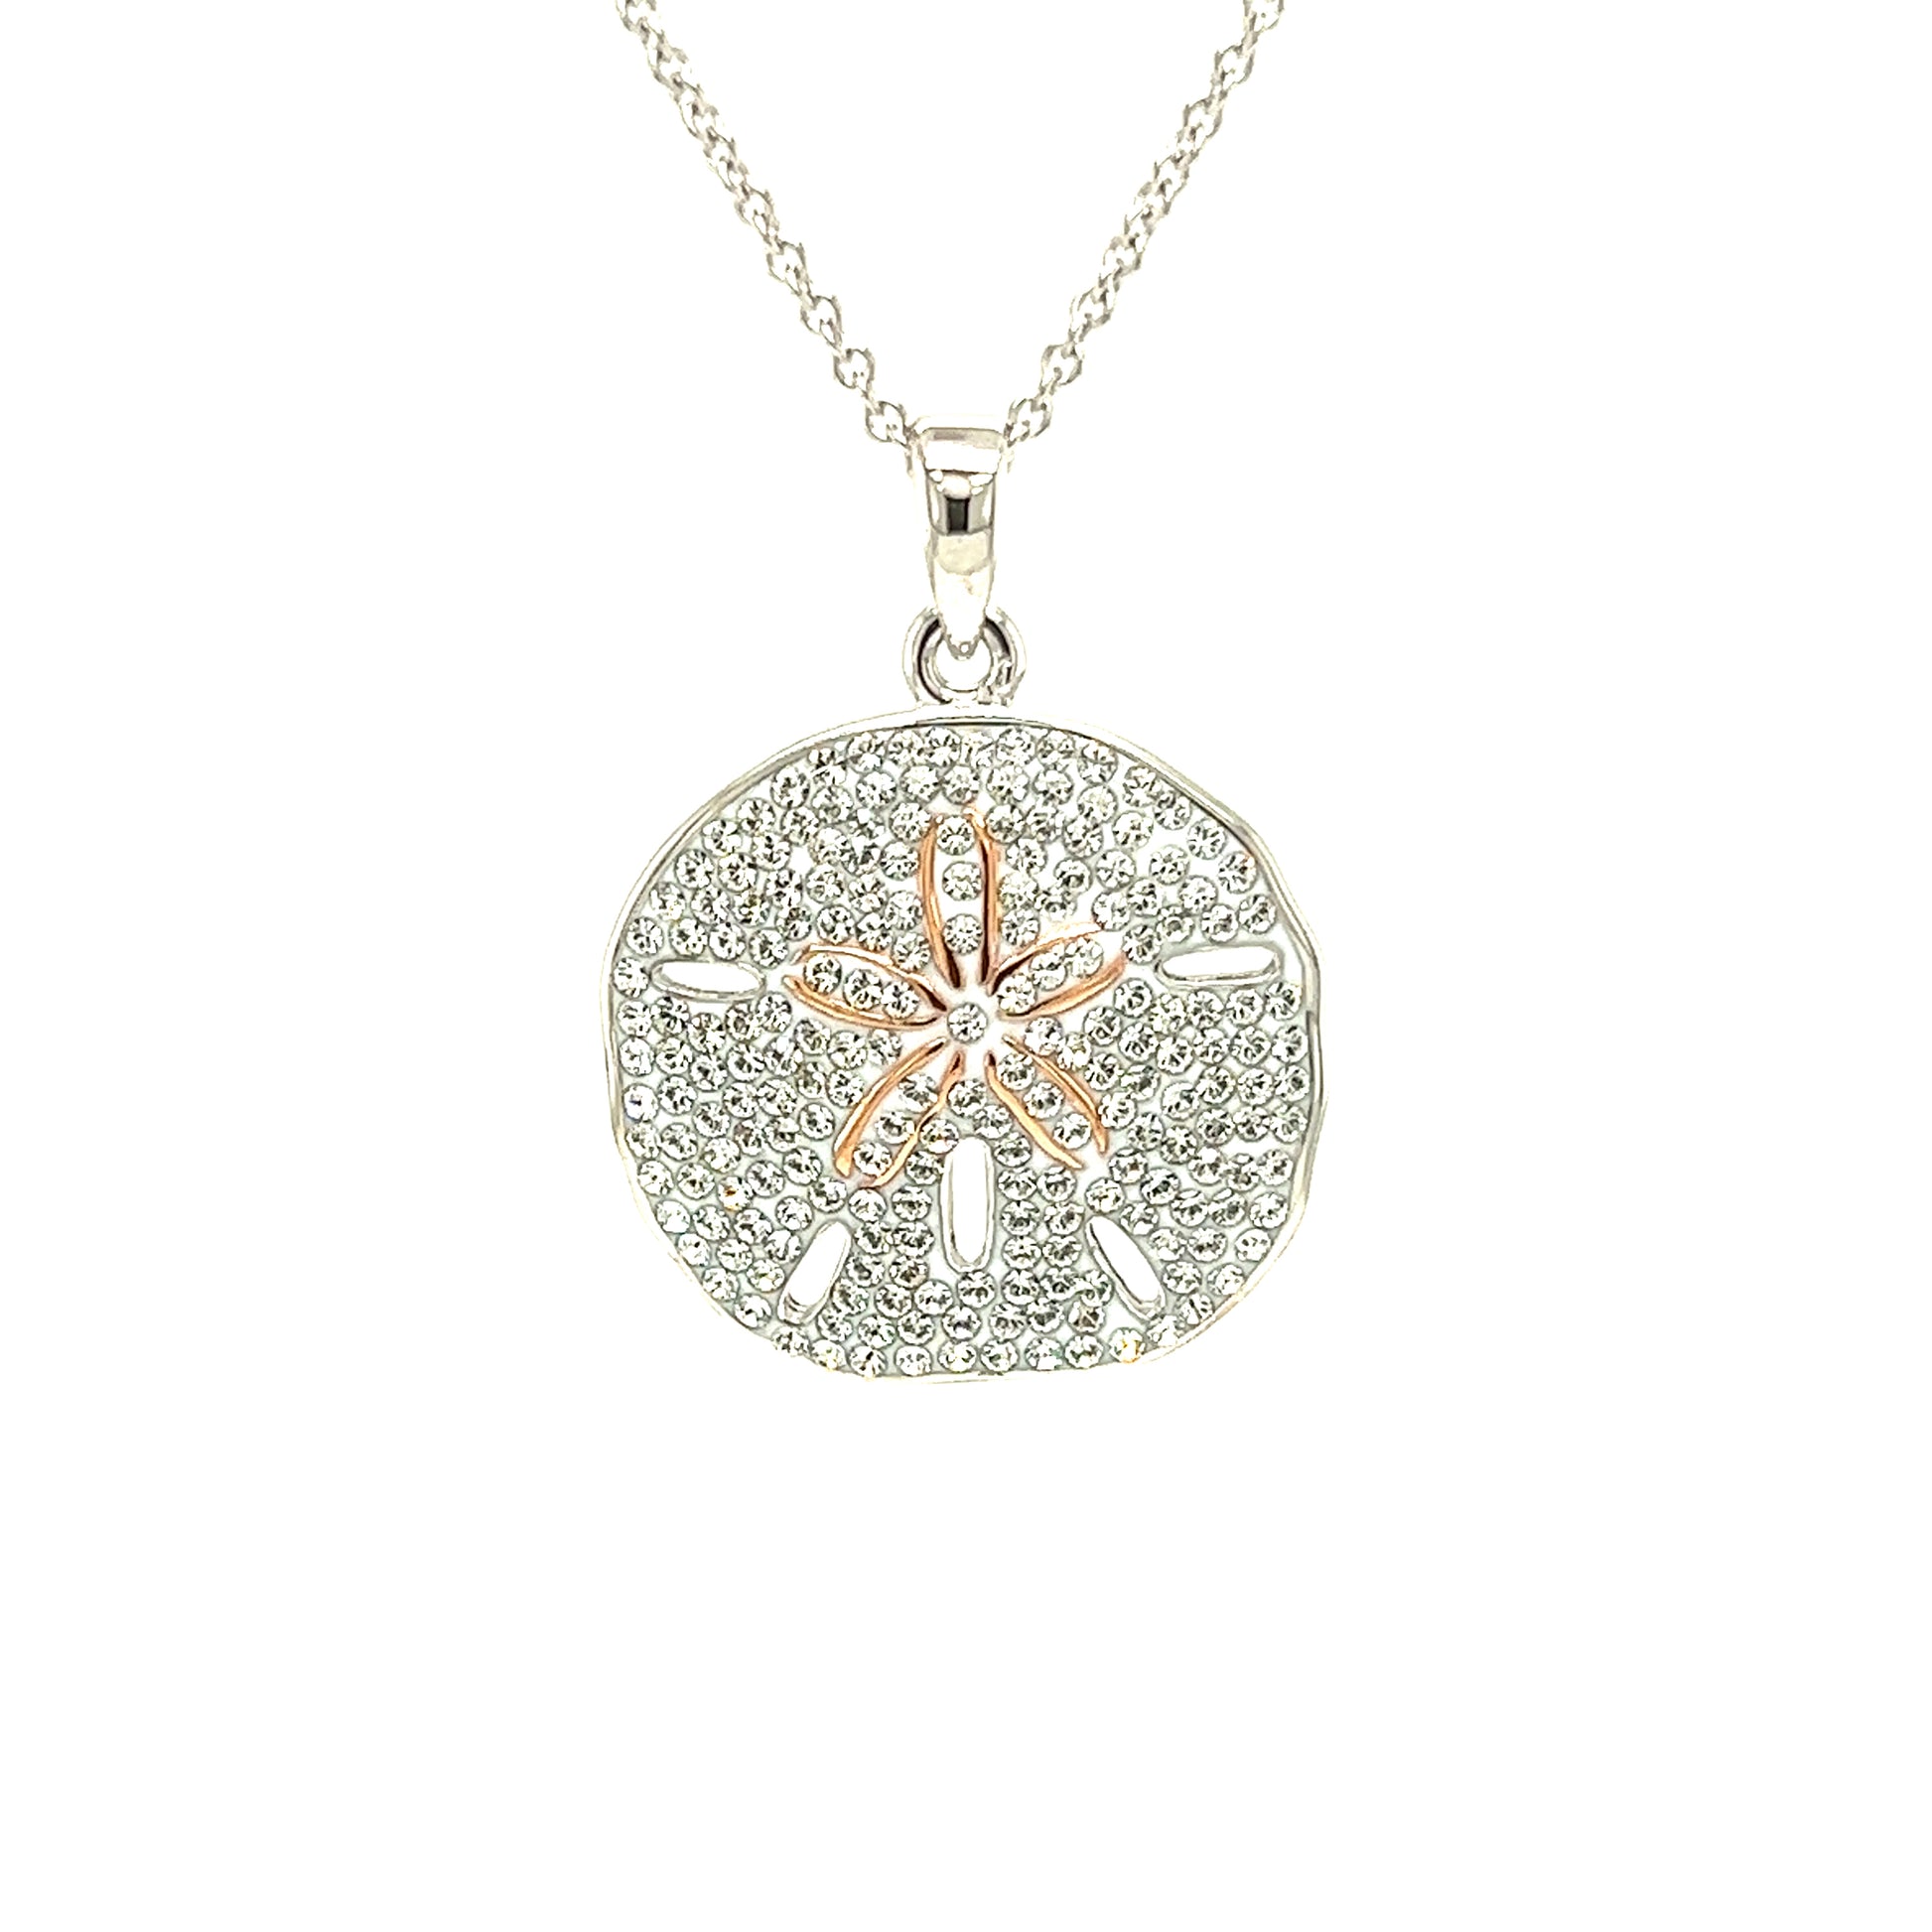 Sand Dollar Necklace With White Crystals and Rose Gold Plating in Sterling Silver Pendant Front View